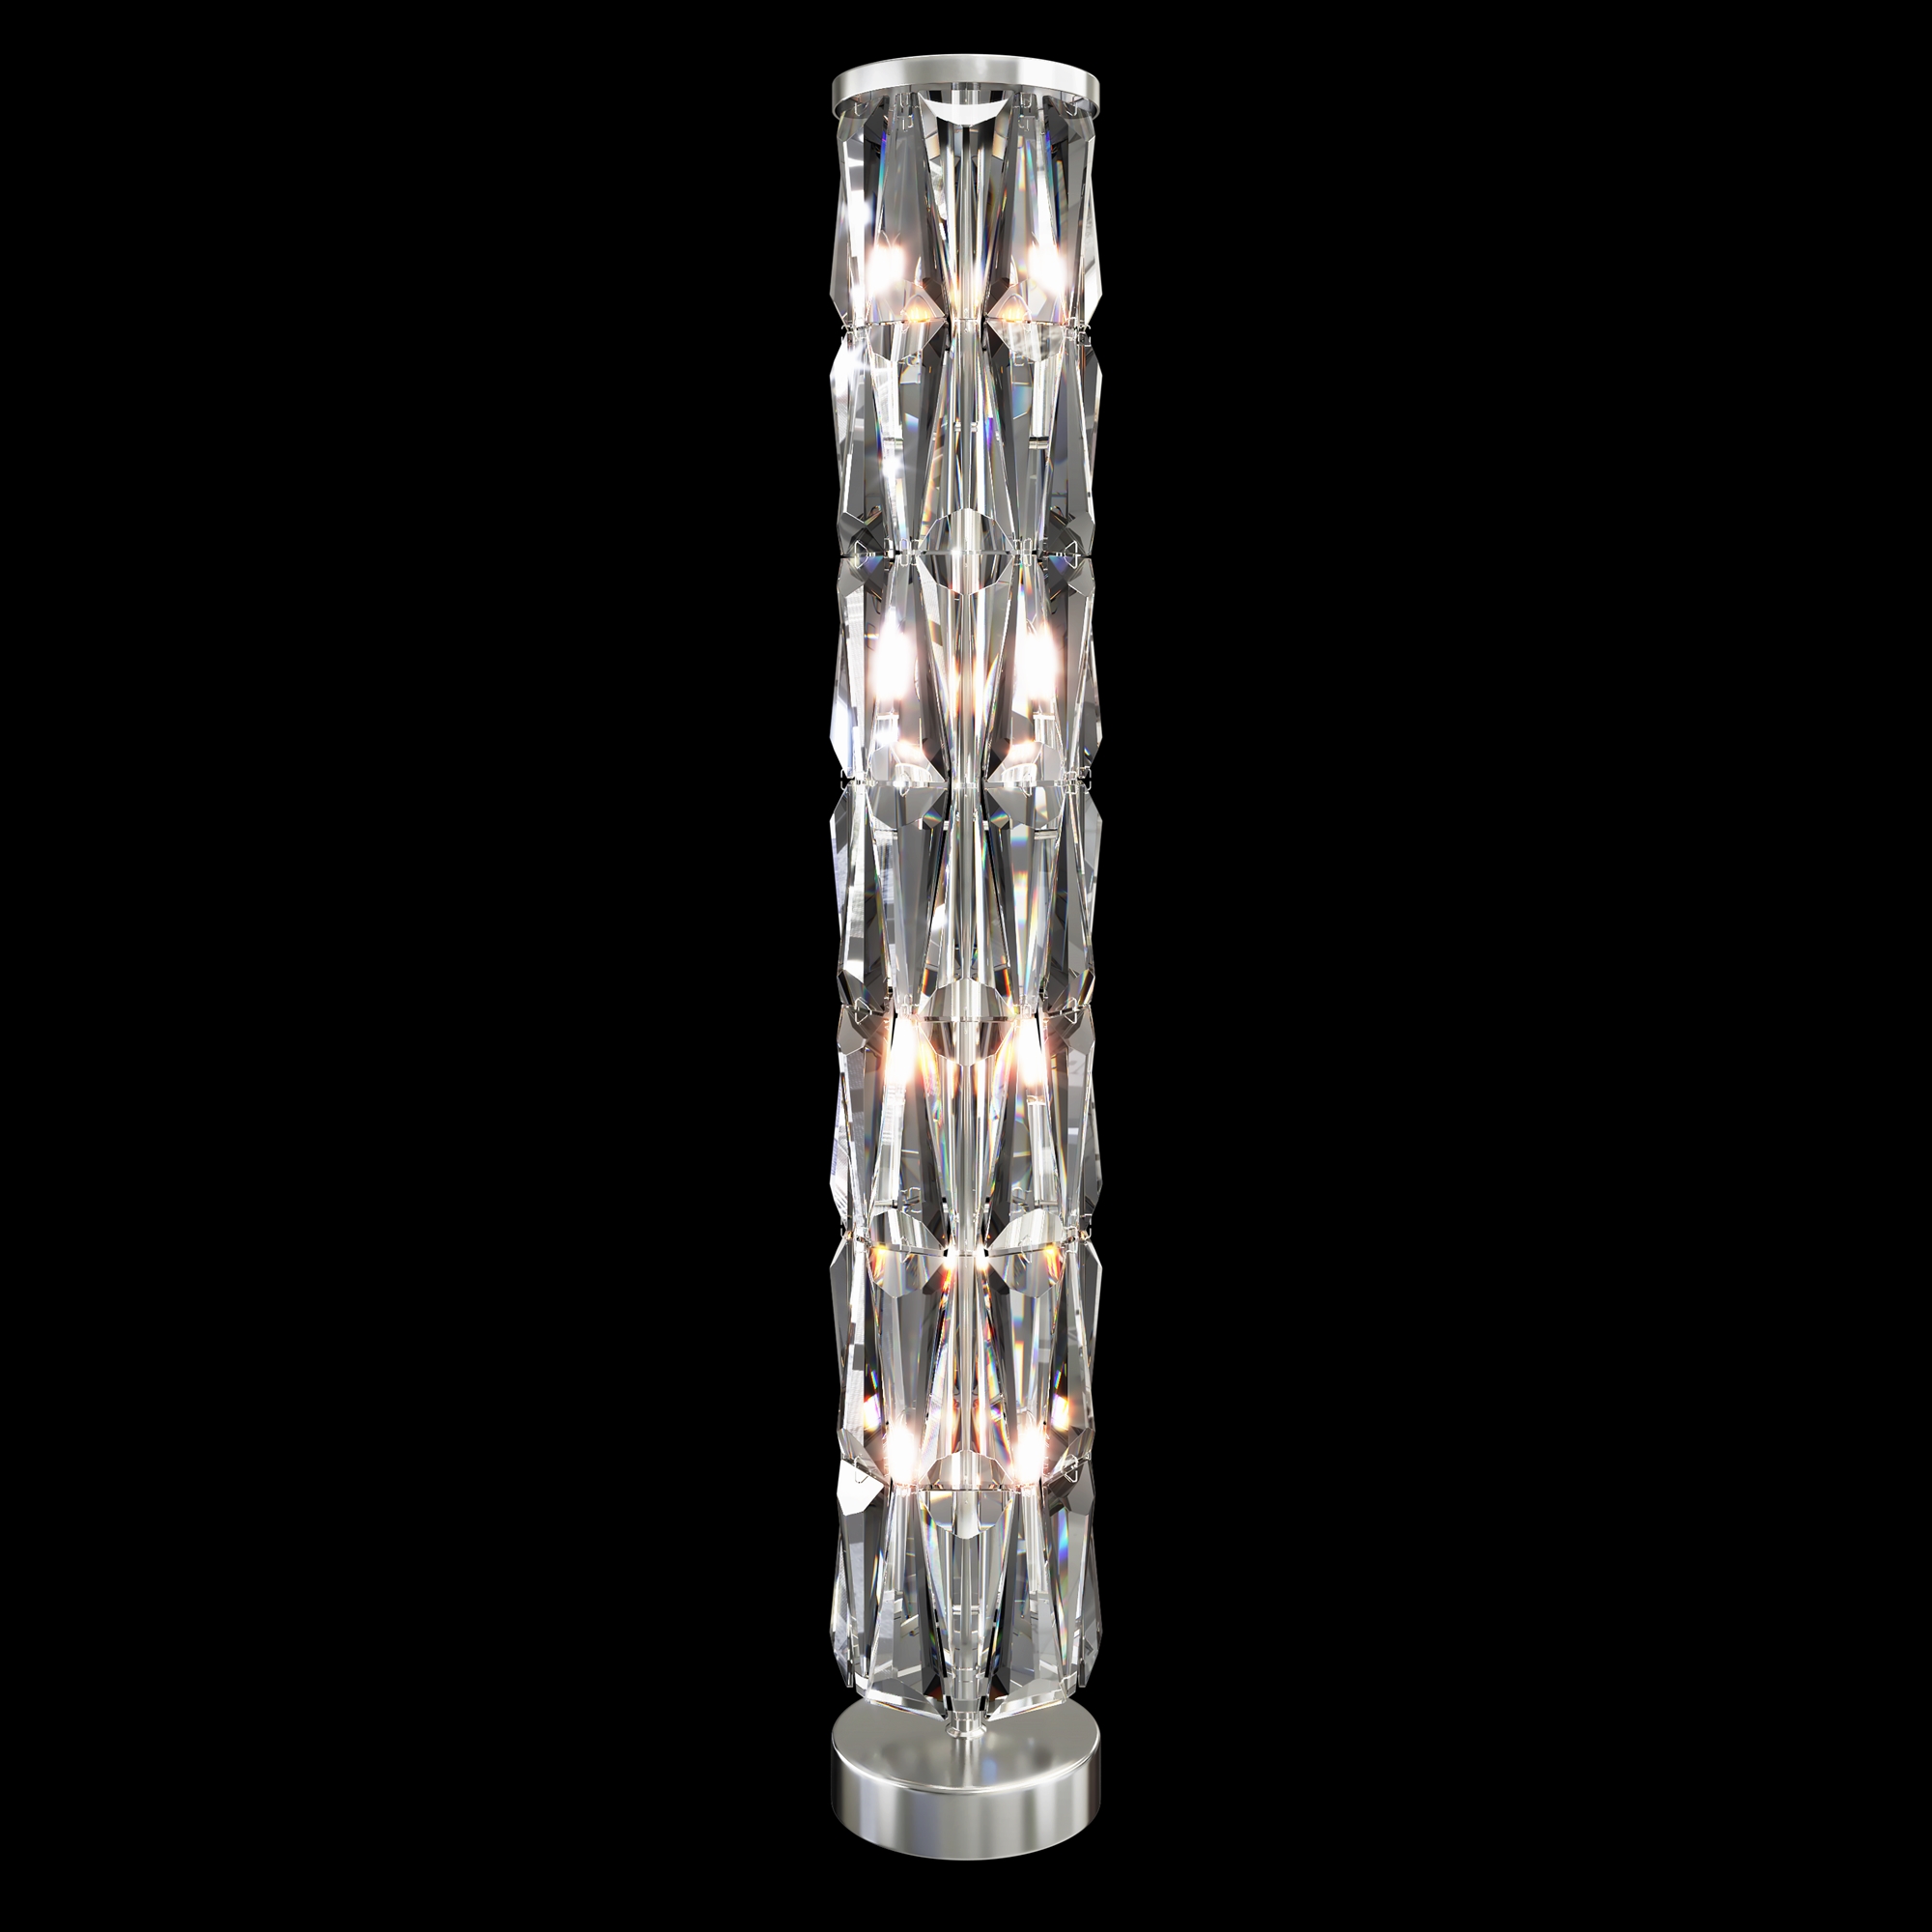 Maytoni Puntes Grīdas lp. 8xE14 60W (dimmable) Chrome (Stainless Steel) (h1265; d200)